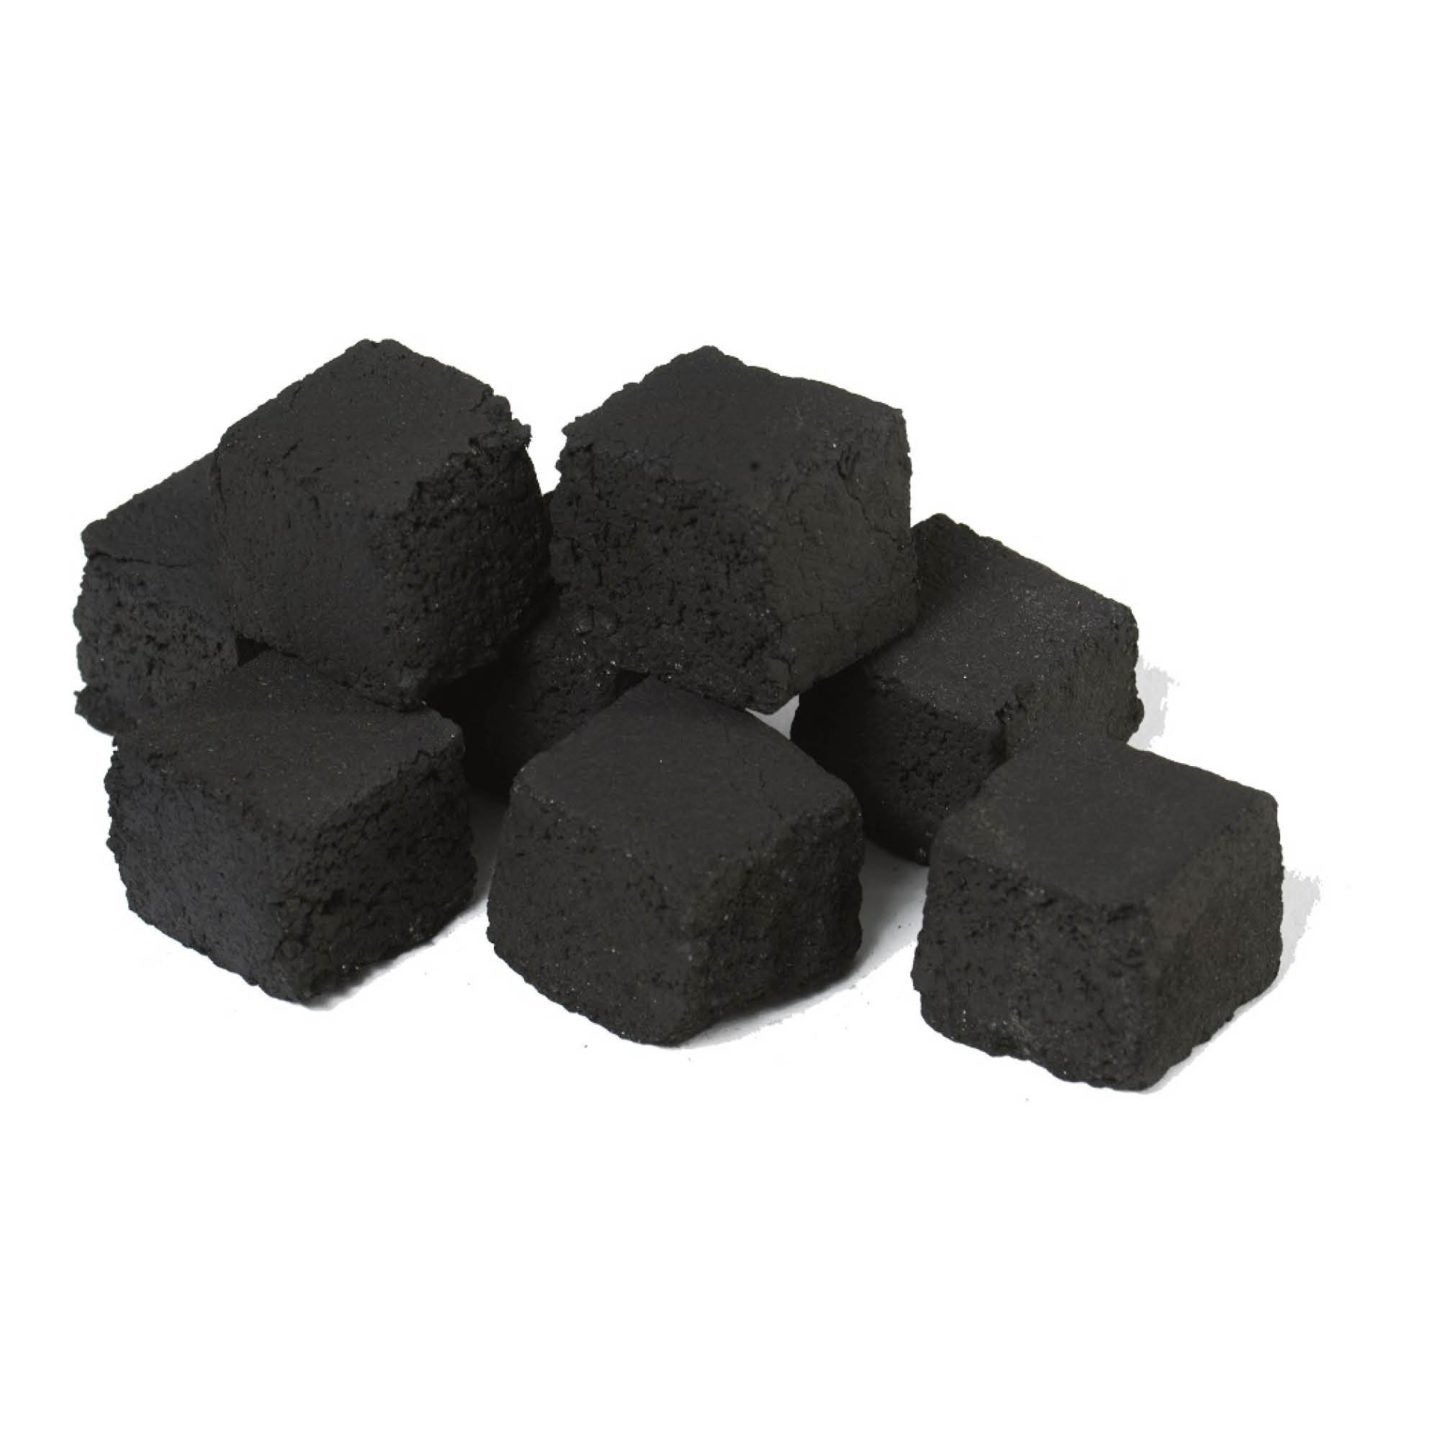 Genie coco charcoal cubes